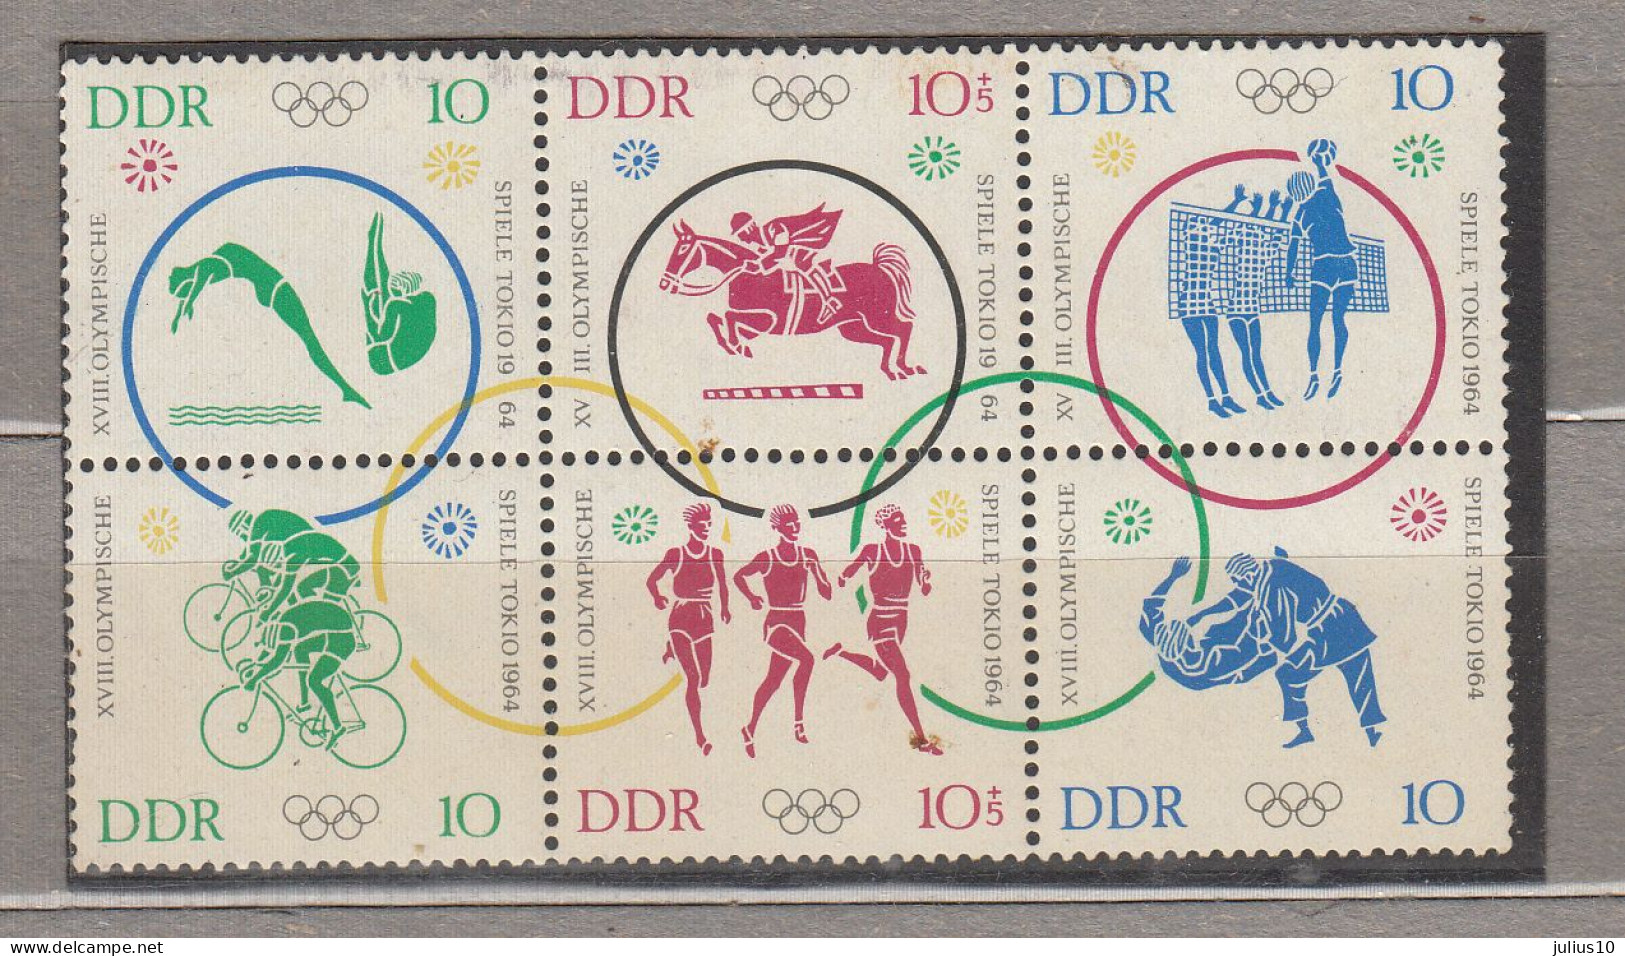 GERMANY DDR Olympic Games 1964 MNH (**) Michel 1039-1044 #Sp190 - Sommer 1964: Tokio